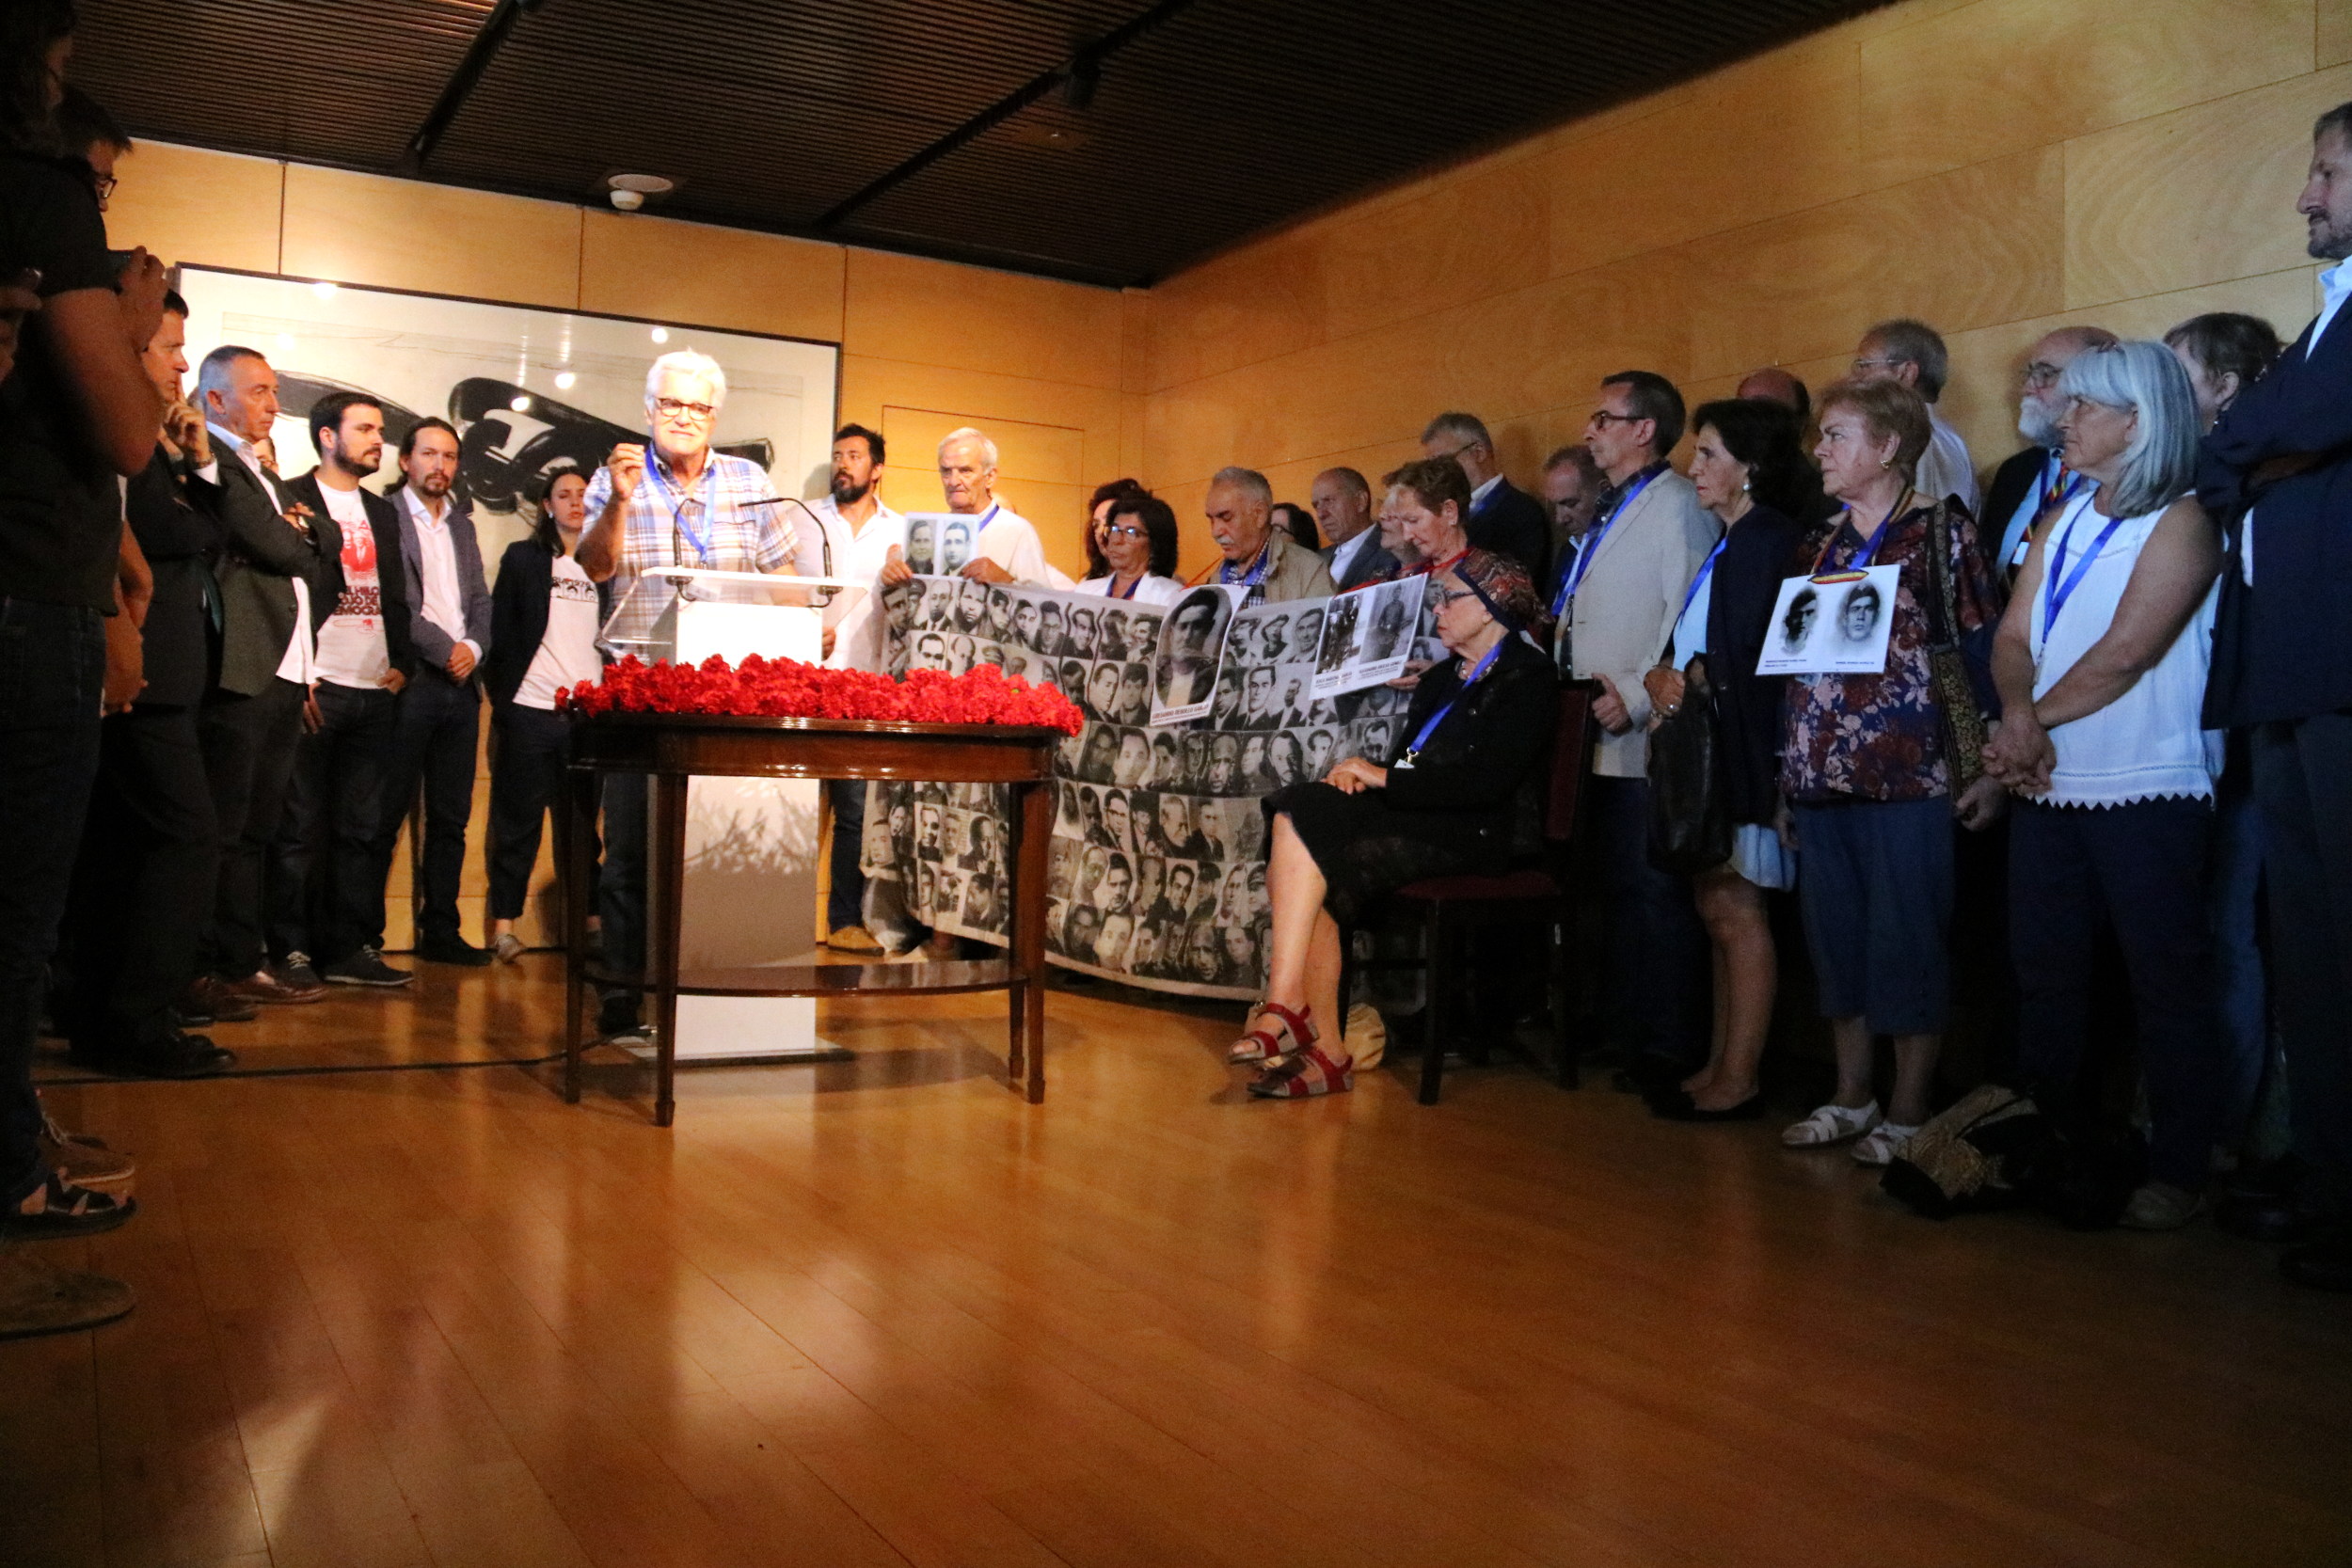 The alternative event for the families of Francoist victims at the Spanish congress